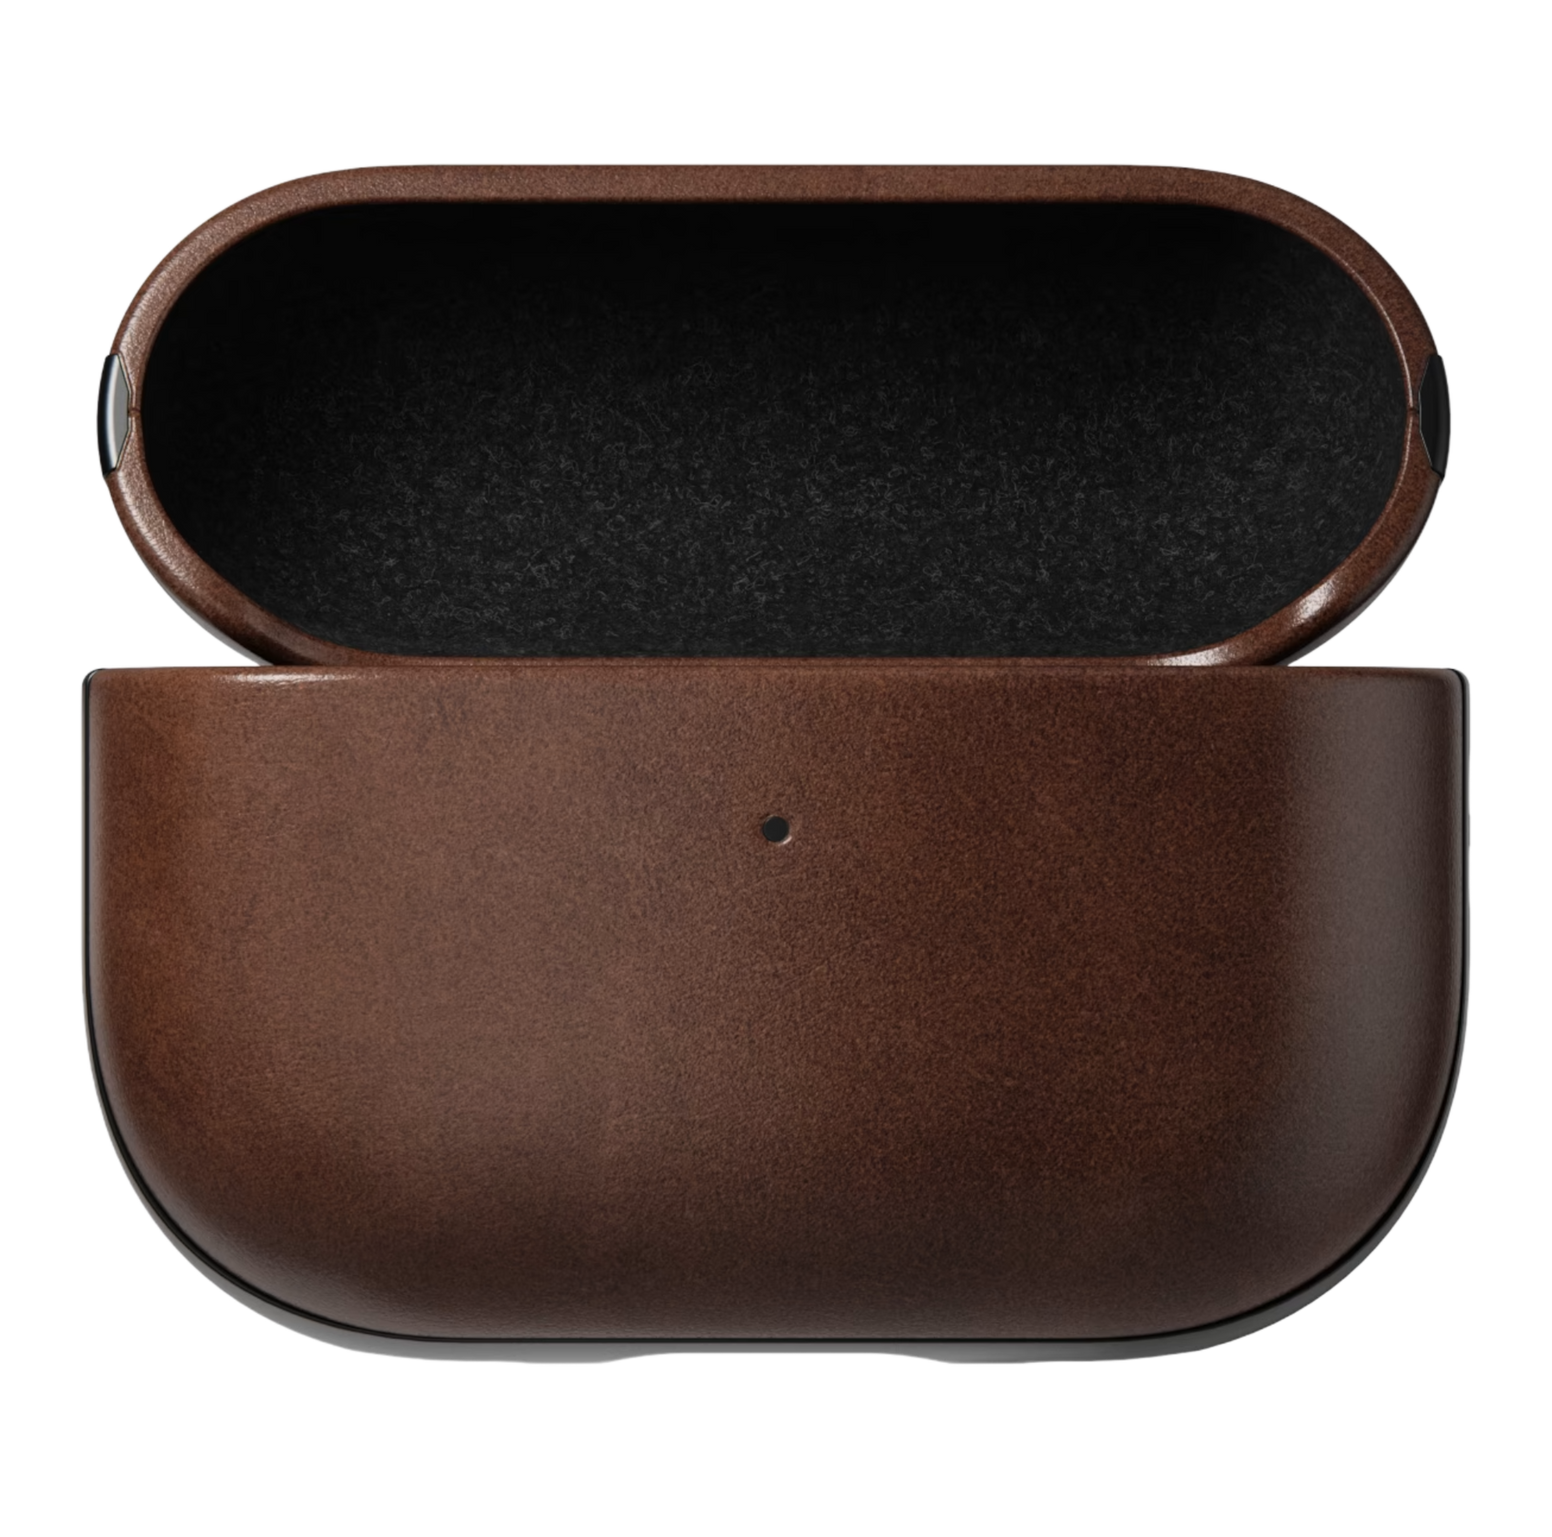 Nomad Modern Case with Horween Leather for AirPods Pro (2nd Gen) - Rustic Brown